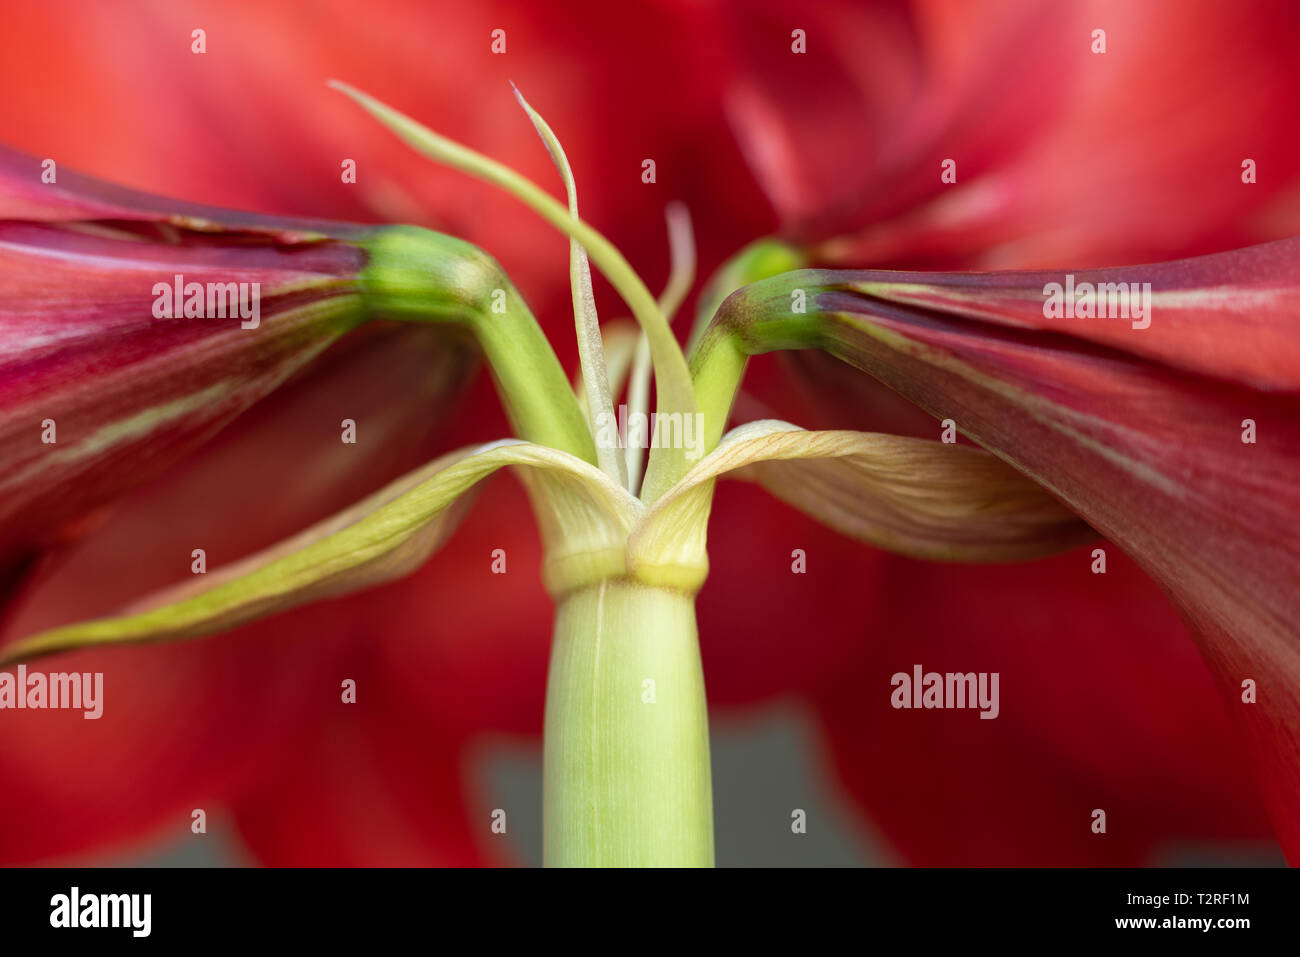 red lily closeup with green stem Stock Photo